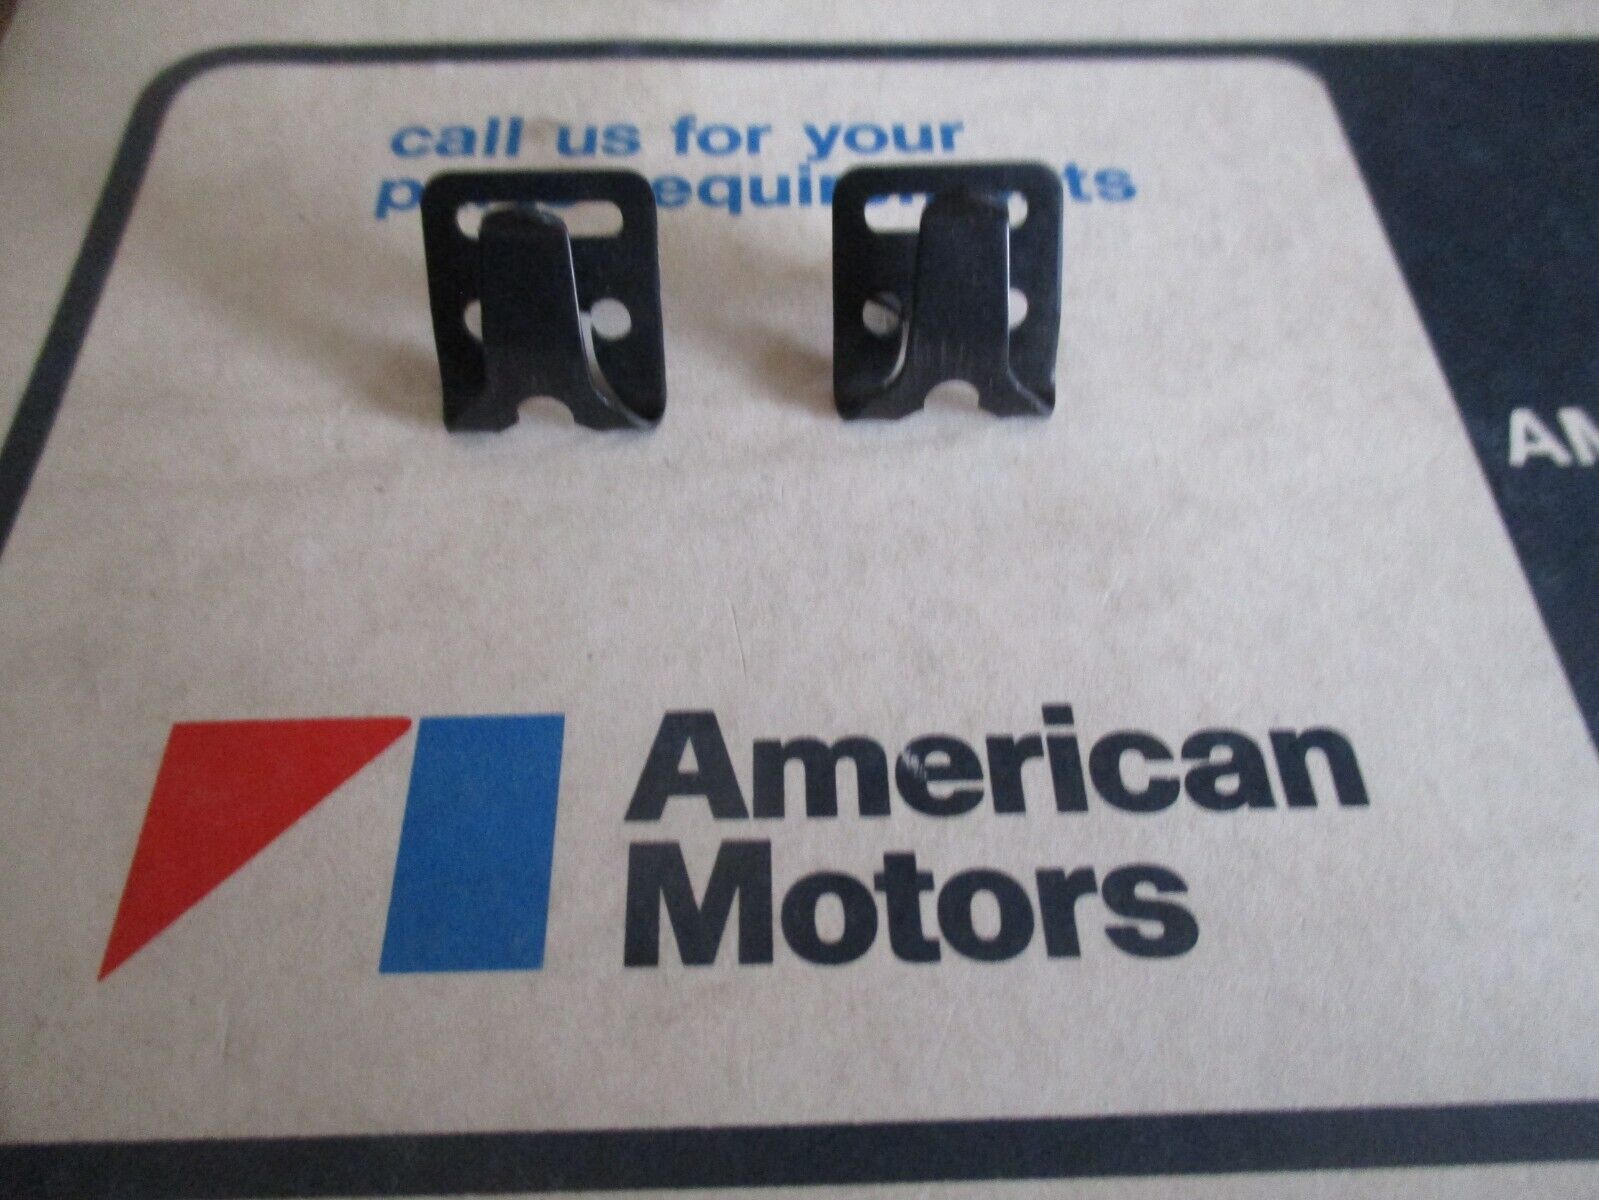 New AMC Jeep Rambler Electric Wiper Washer Bag mounting clips AMX Javelin Rebel